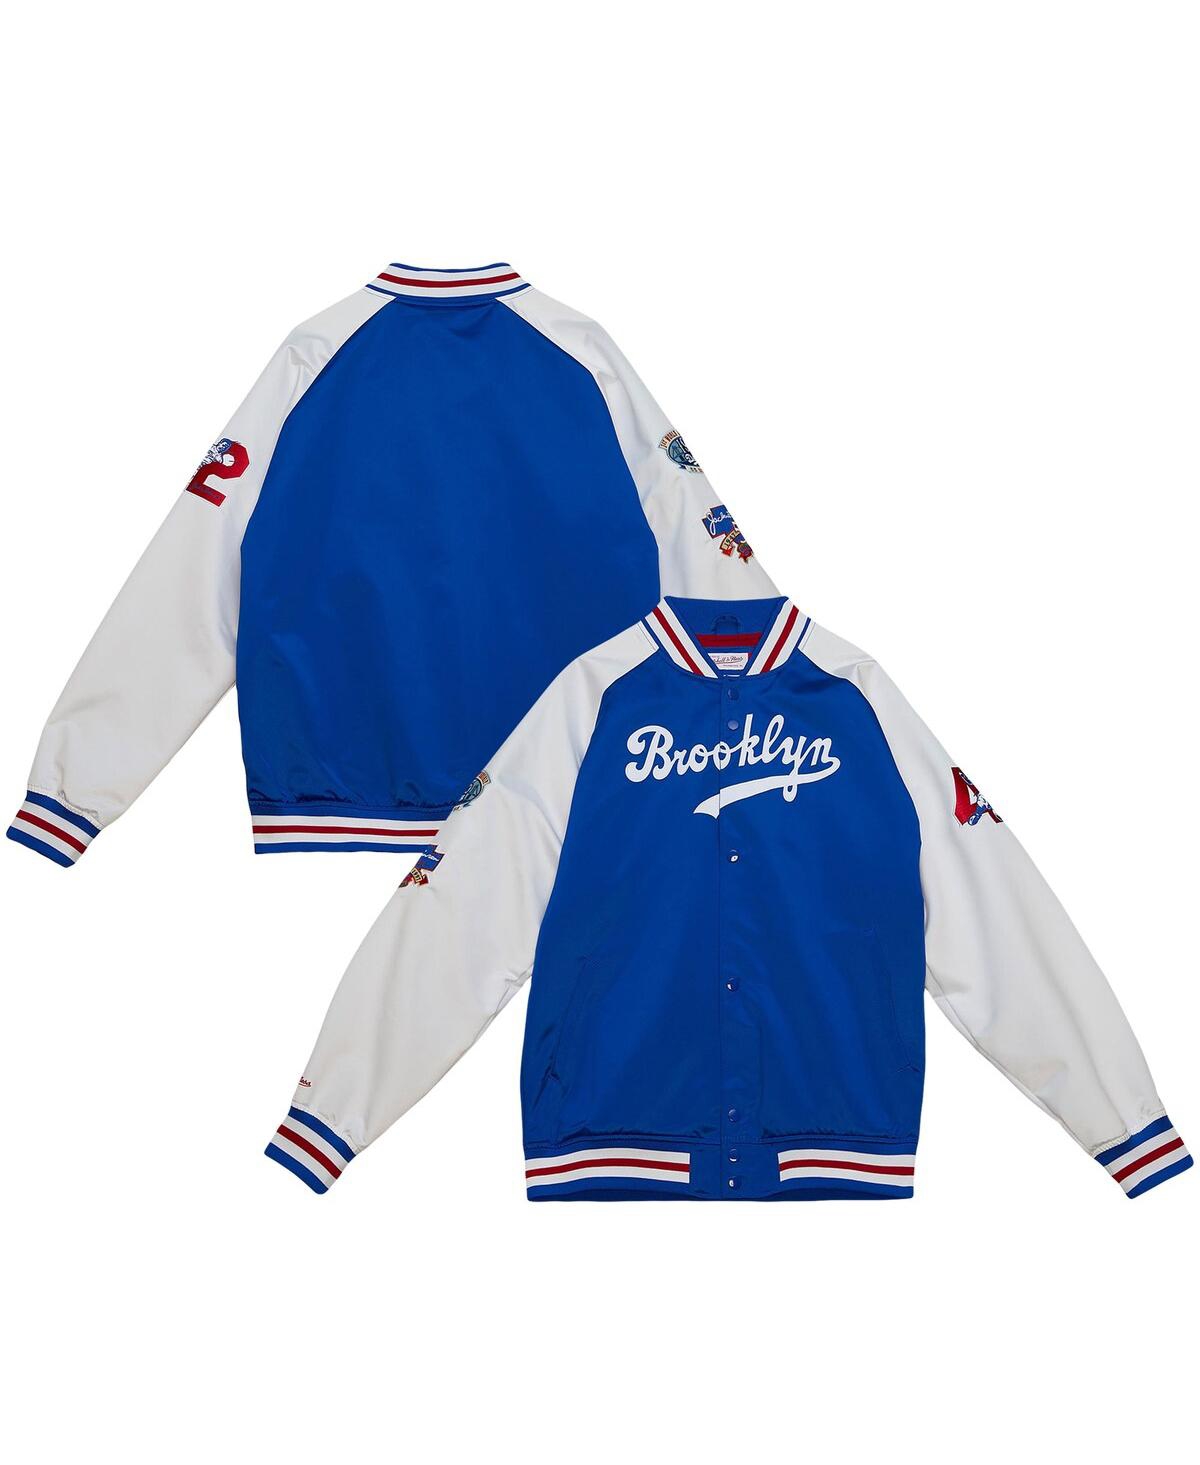 Nike Men's Jackie Robinson White Brooklyn Dodgers Home Cooperstown  Collection Player Jersey - Macy's